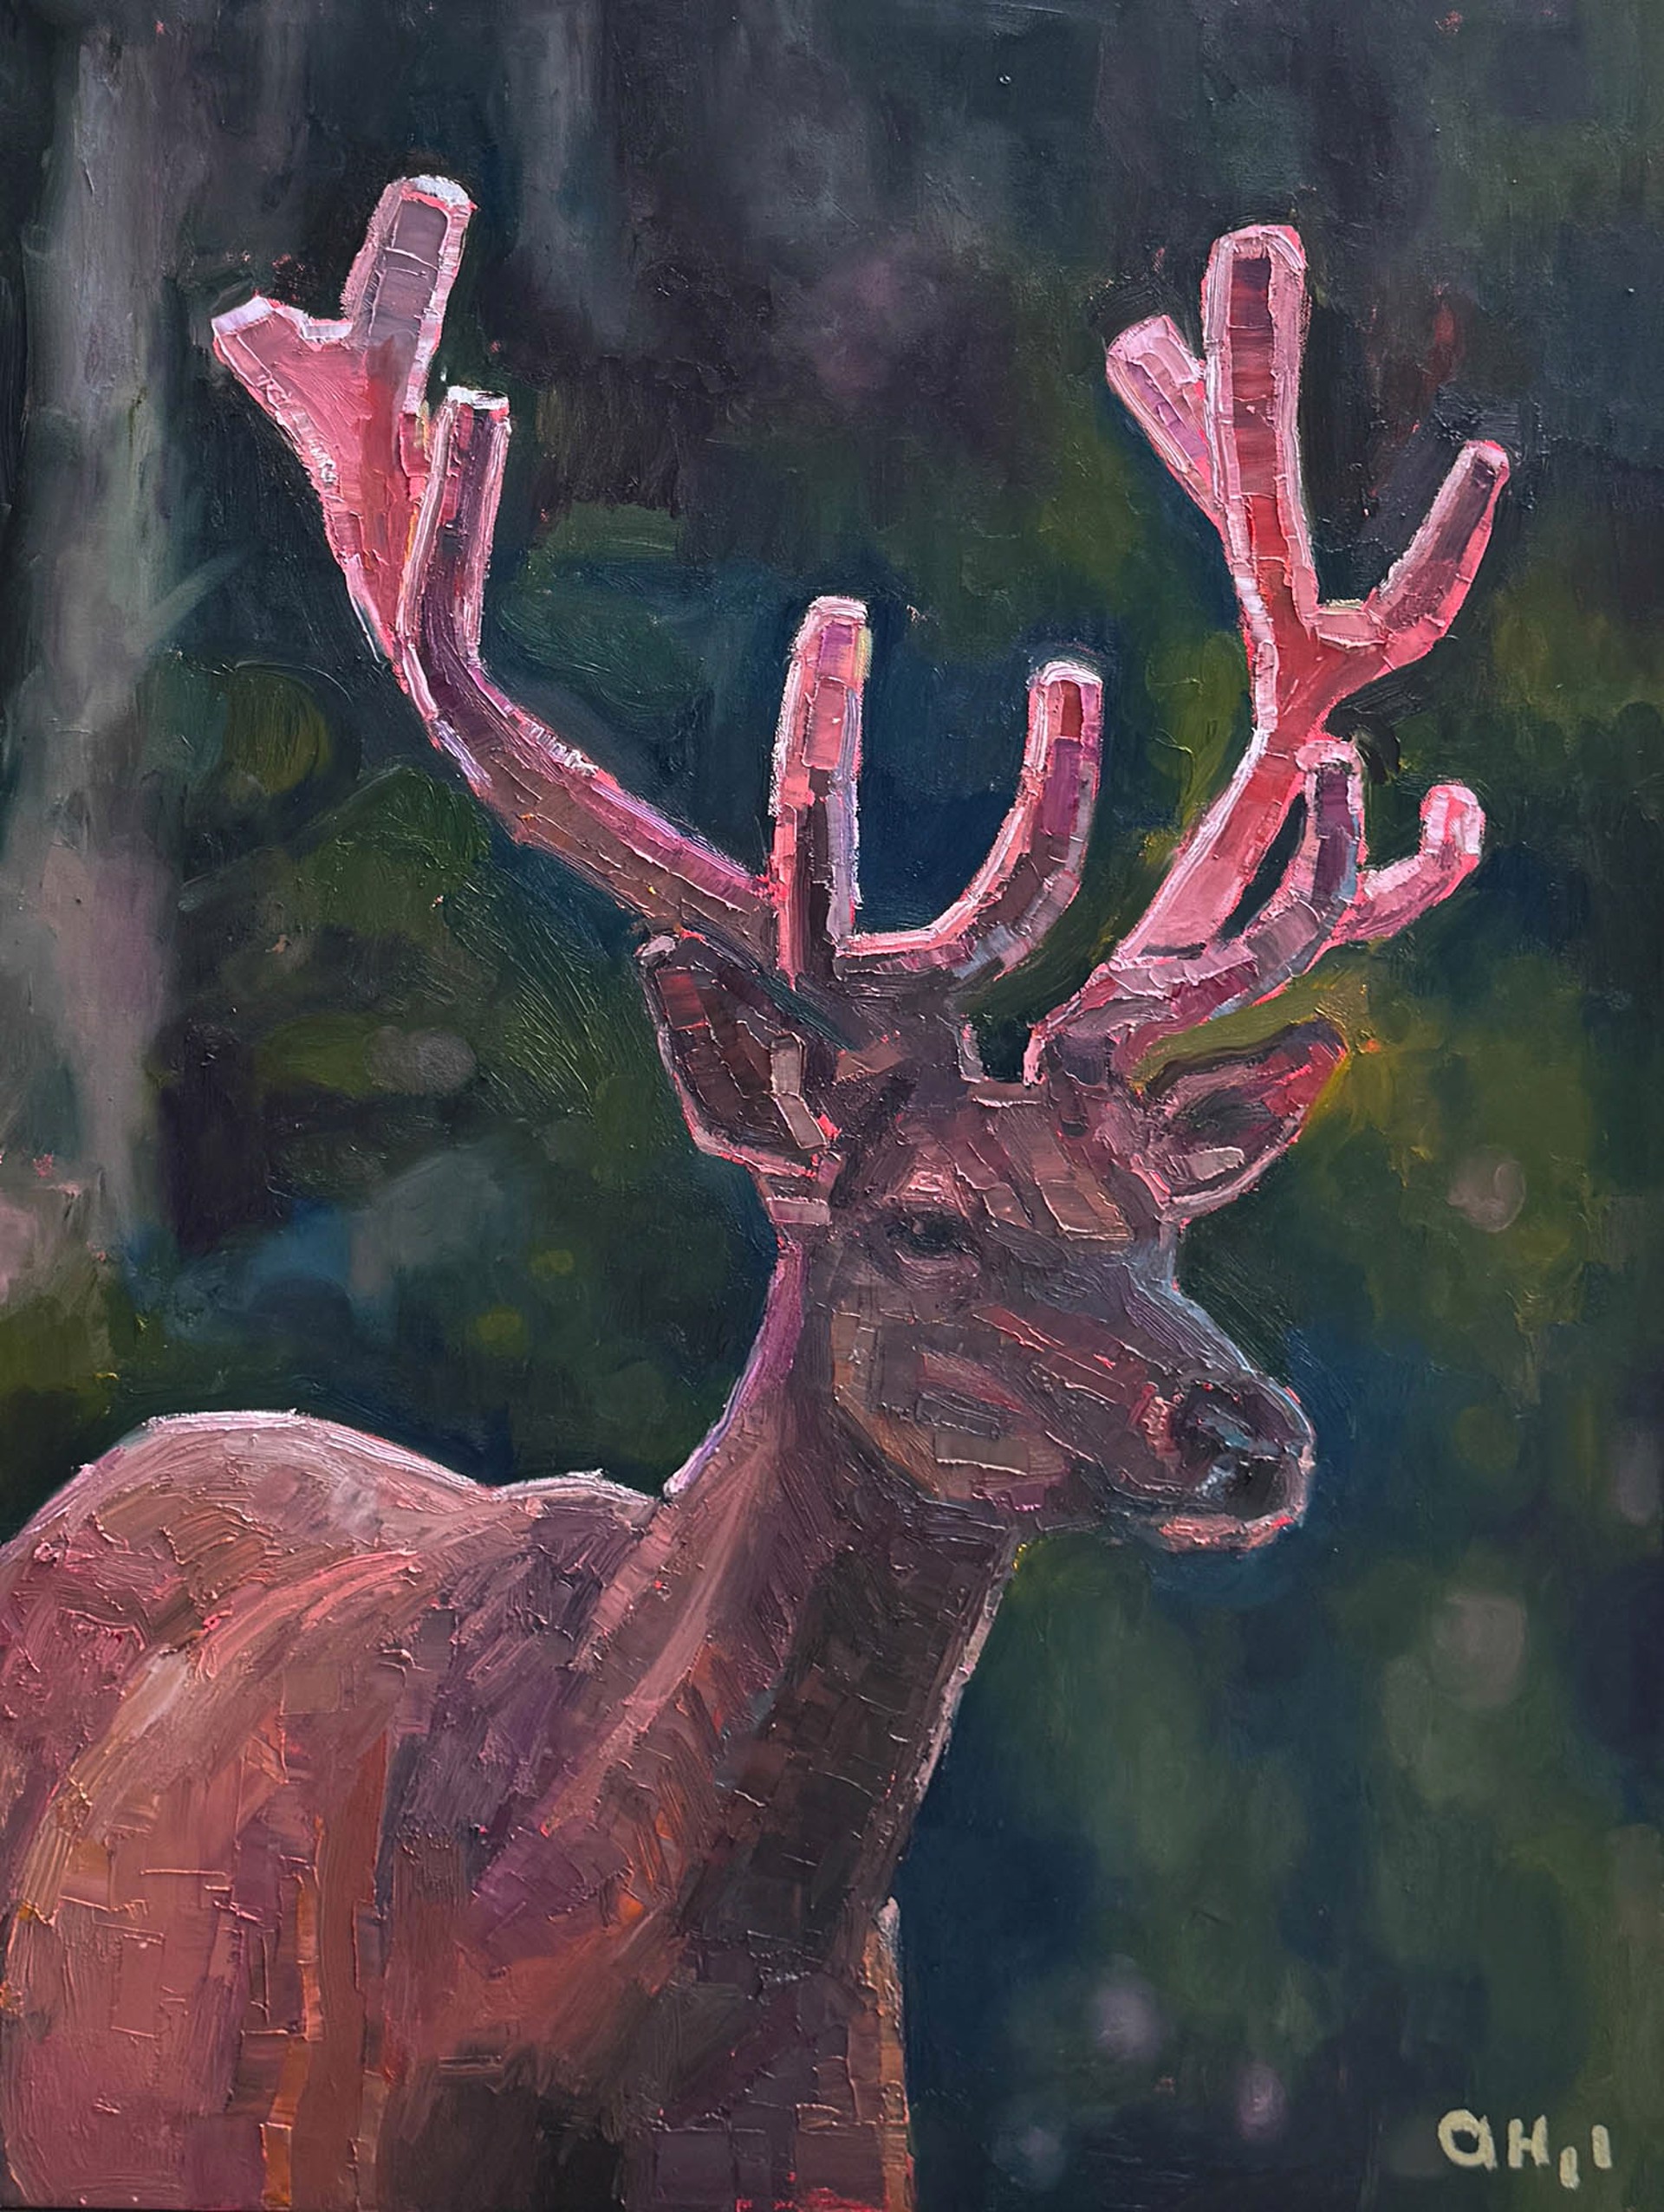 Original Oil Painting By Aaron Hazel Featuring A Deer On A Green and Blue Abstract Background